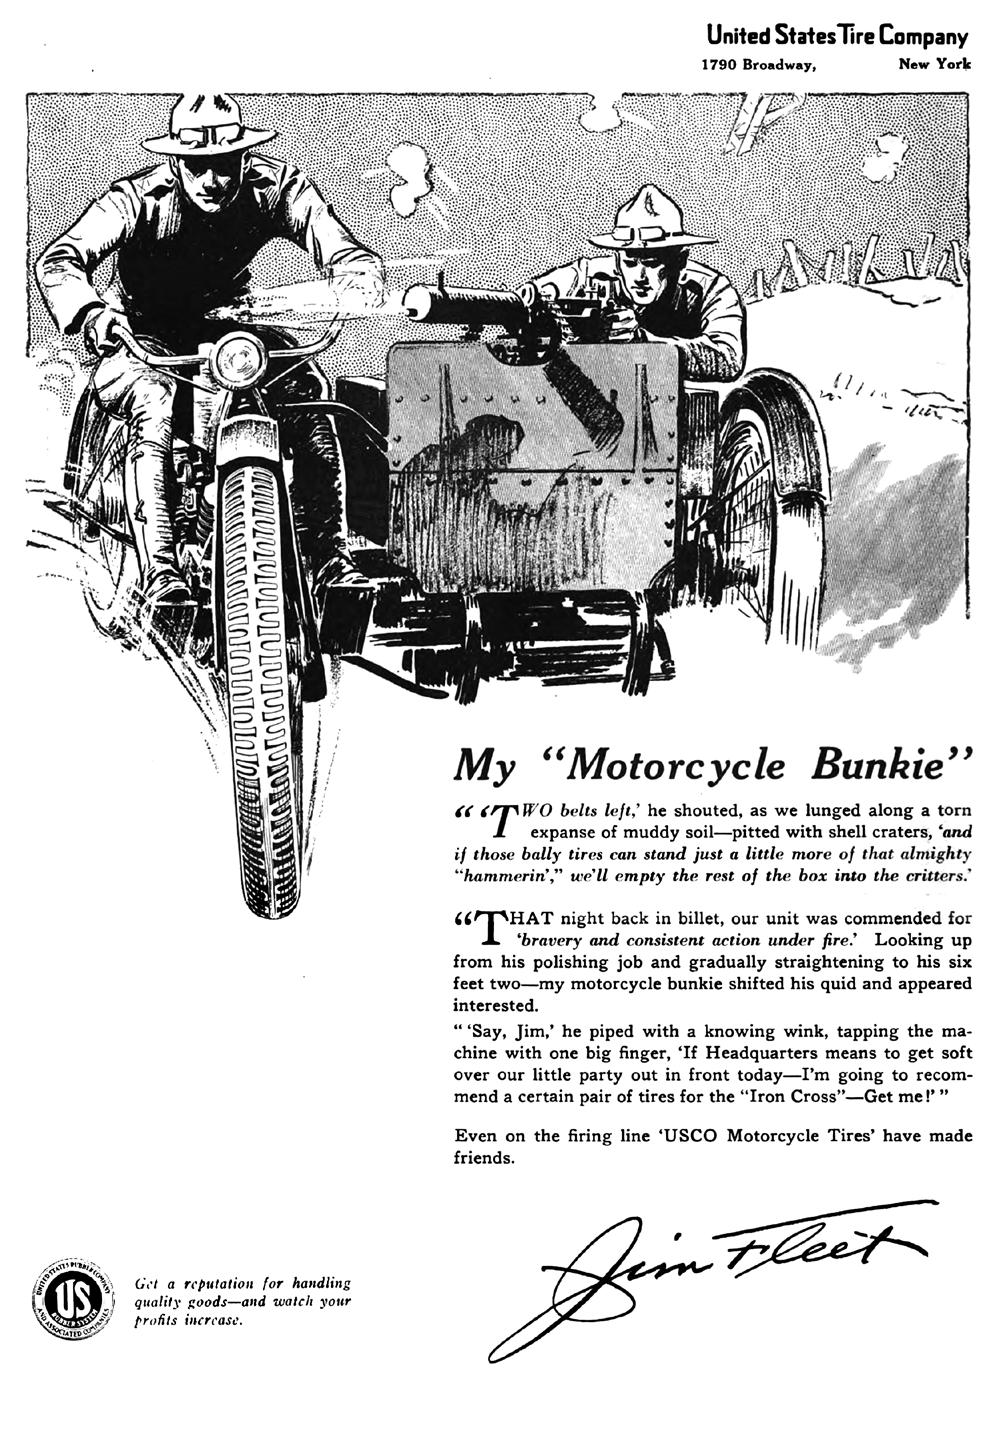 40. Advertisement published in the magazine